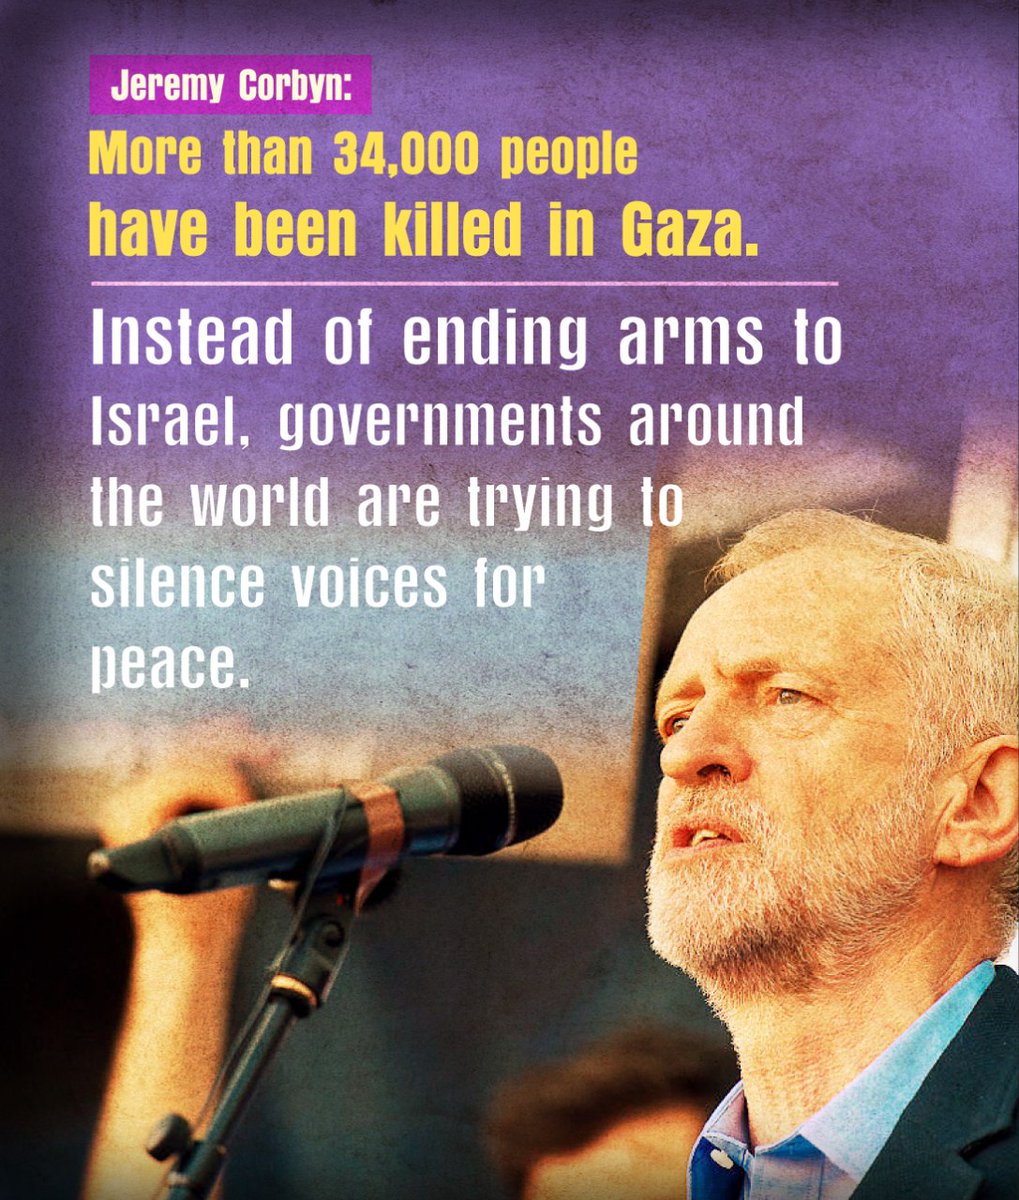 Jeremy Corbyn: More than 34,000 people have been killed in Gaza. Instead of ending arms to Israel, governments around the world are trying to silence the voice of peace.

#gaza
#freepalestine